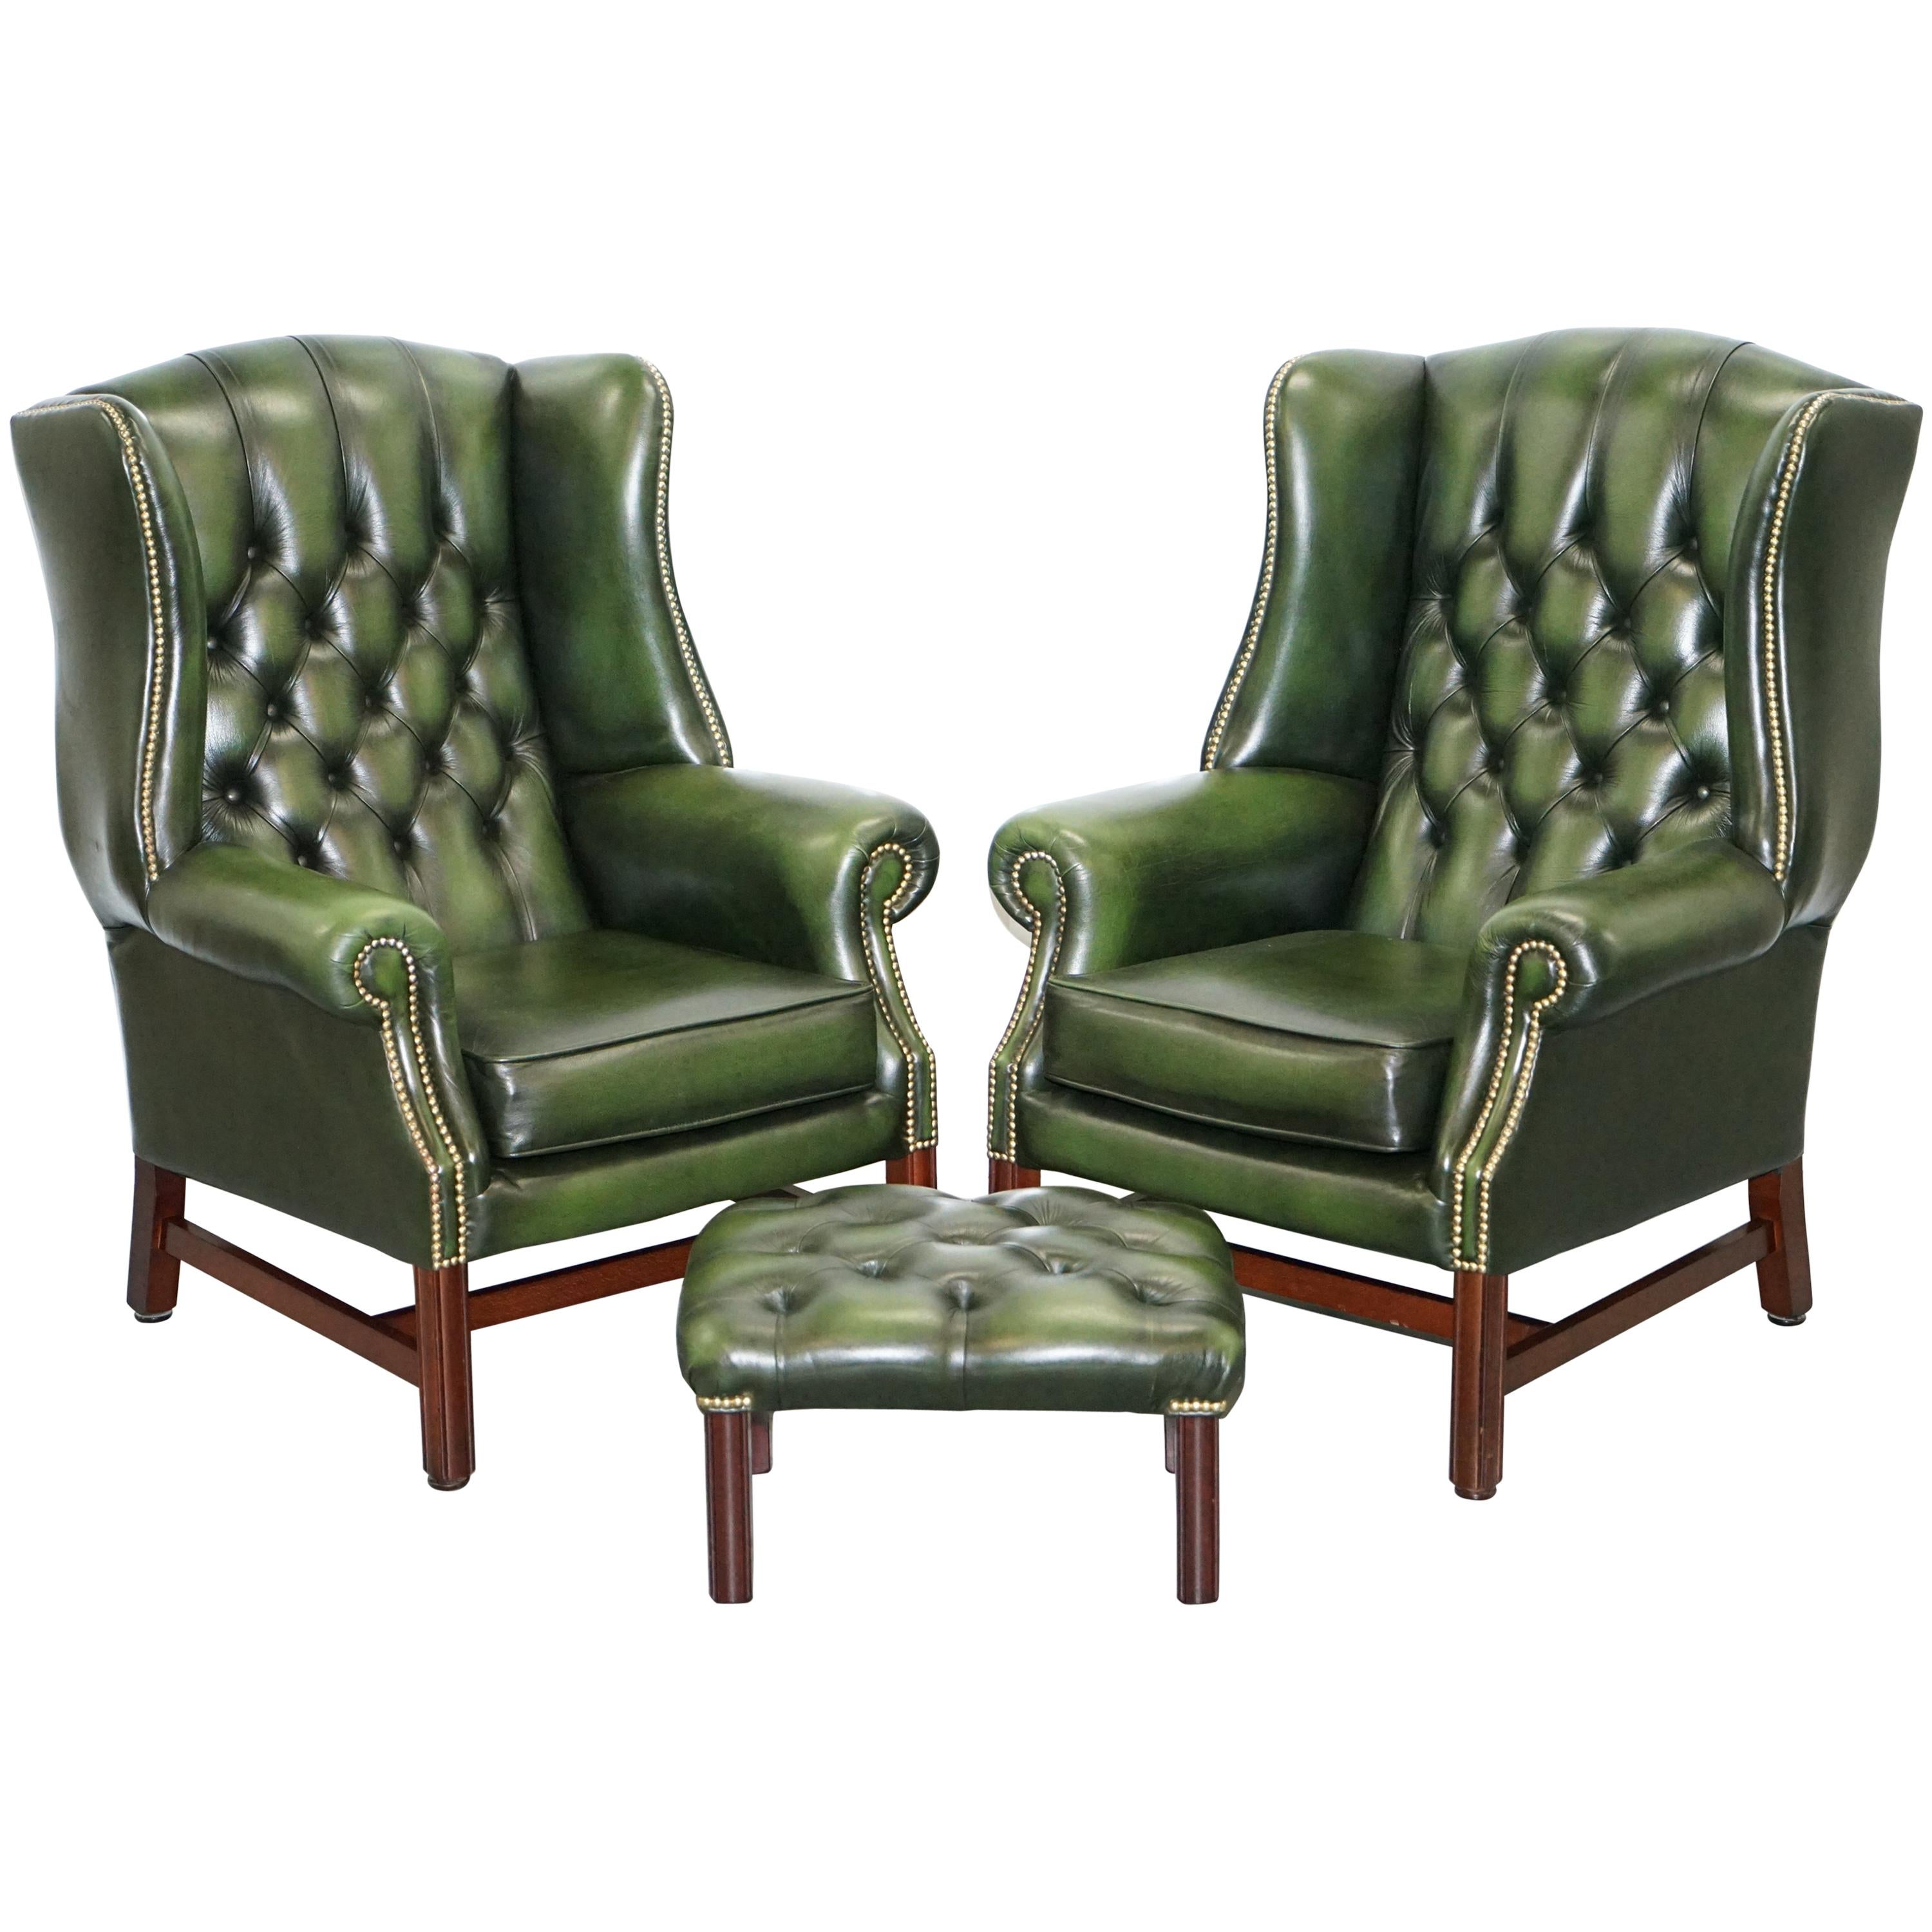 Large Pair of Luxury Green Leather Chesterfield Wingback Armchairs & Footstool